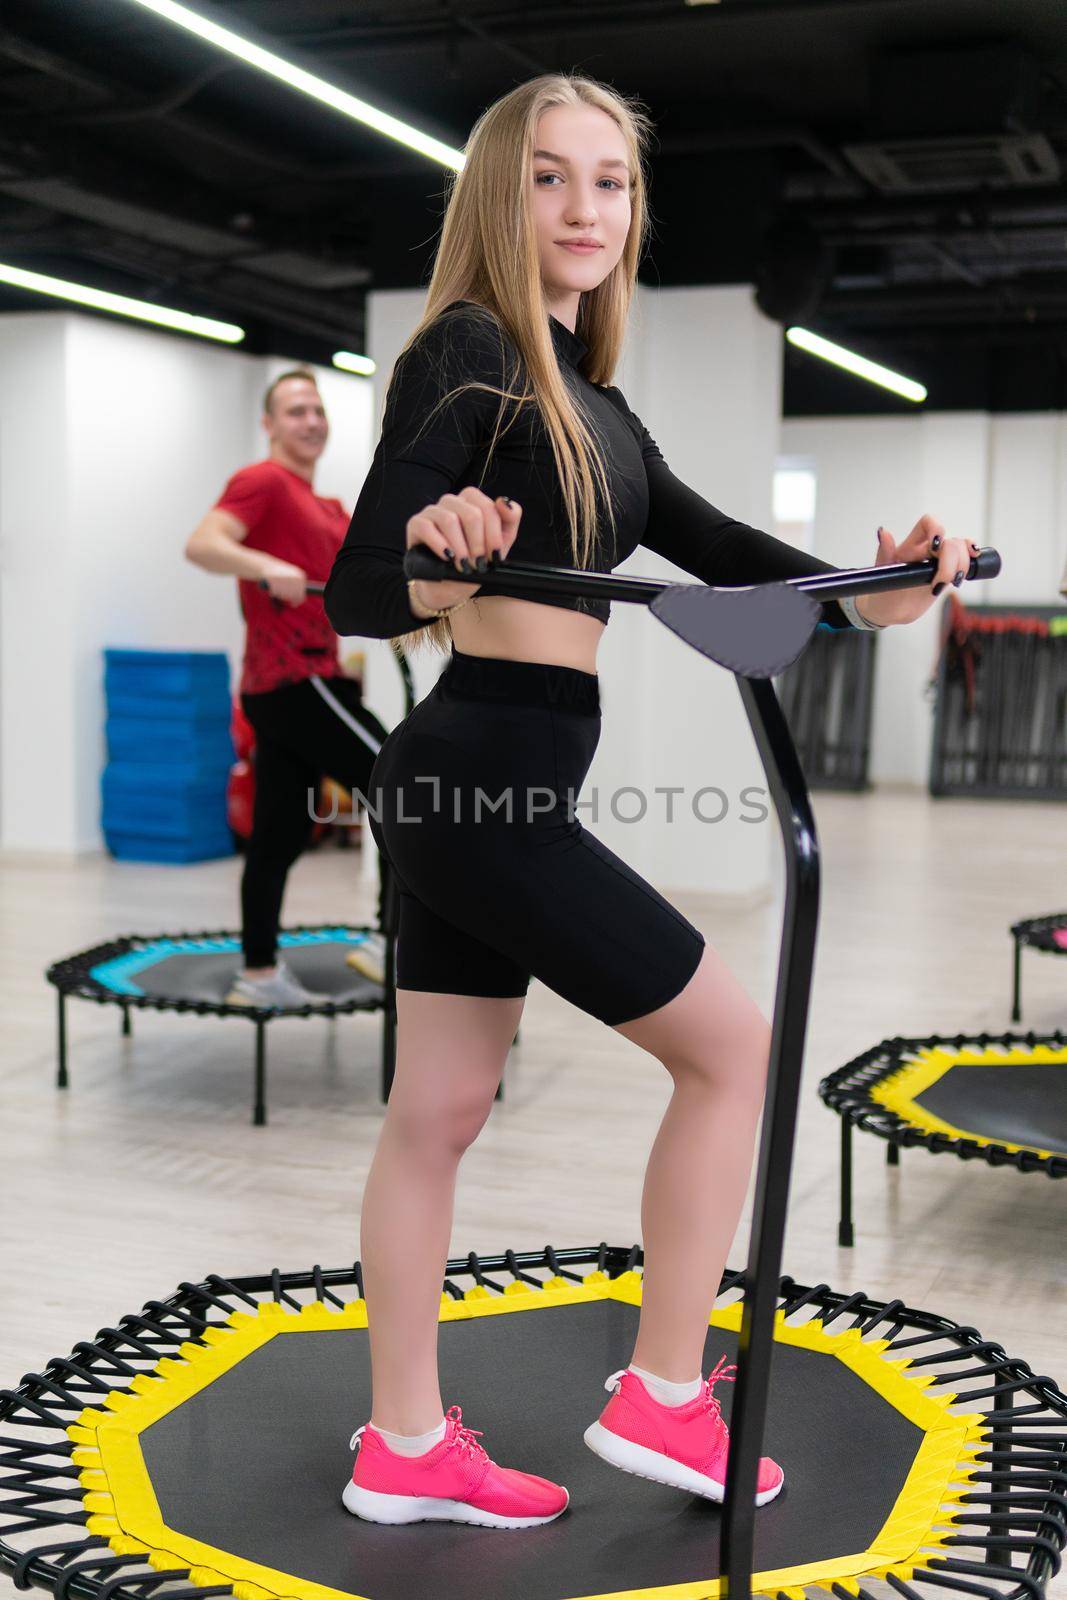 Beautiful girl on a yellow trampoline, in red sneakers stands in the gym. Women's and men's group on a sports trampoline, fitness training, healthy life - a concept trampoline group batut instructor men, for fit athletic from sporty for sport motion, wellness happiness. Studio happy athlete, class